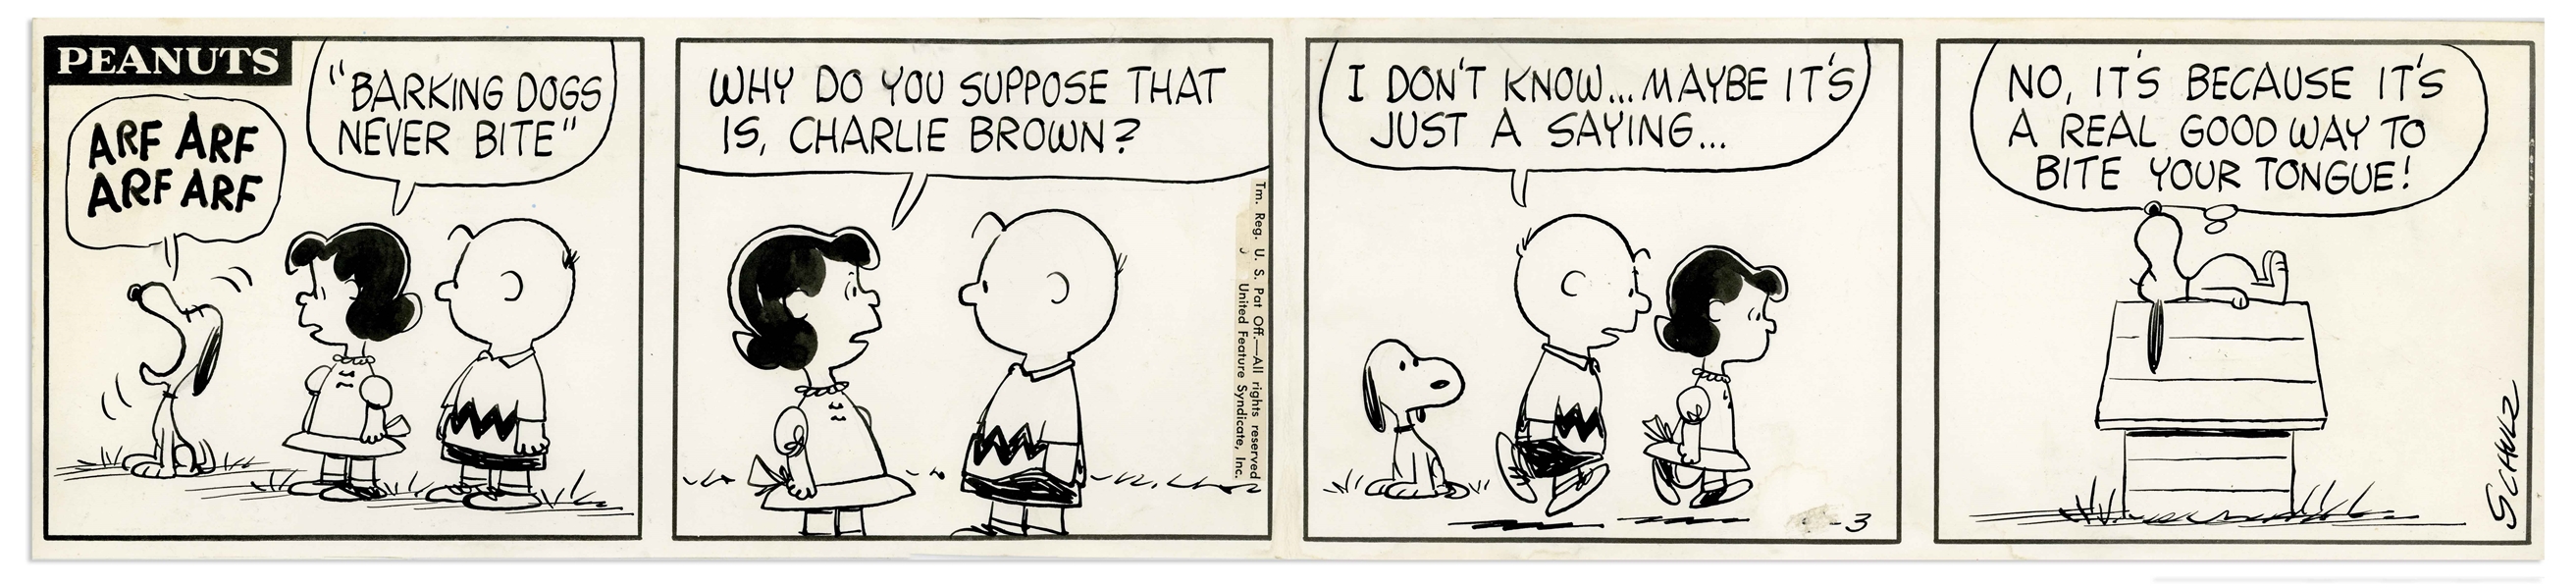 Original Charles Schulz Hand-Drawn ''Peanuts'' Comic Strip From 1960 Featuring Charlie Brown, Snoopy & Lucy -- ''Barking Dogs Never Bite''